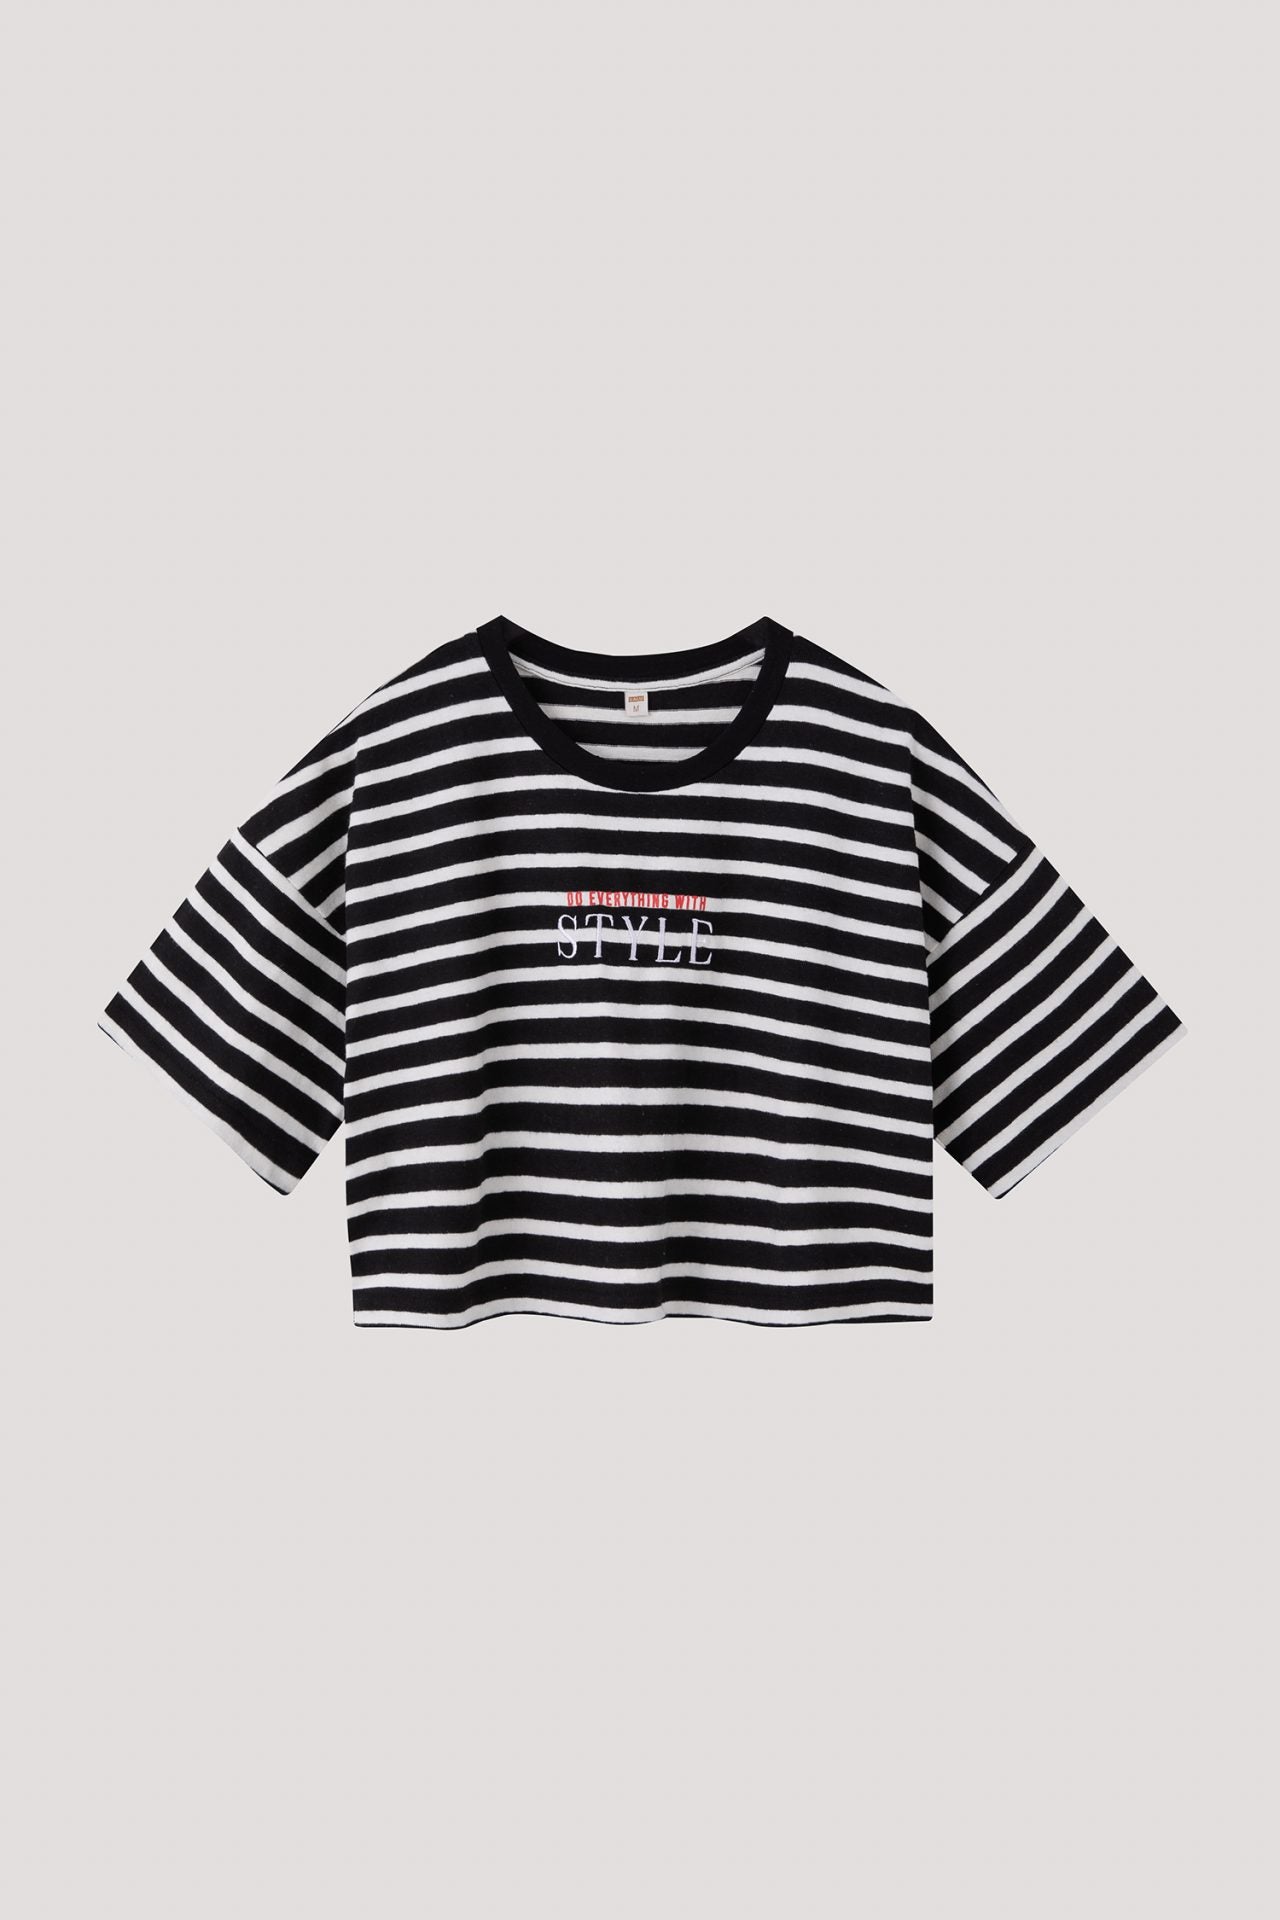 BT 11601 OVERSIZED EMBROIDERED STRIPED CROP TEE BLACK